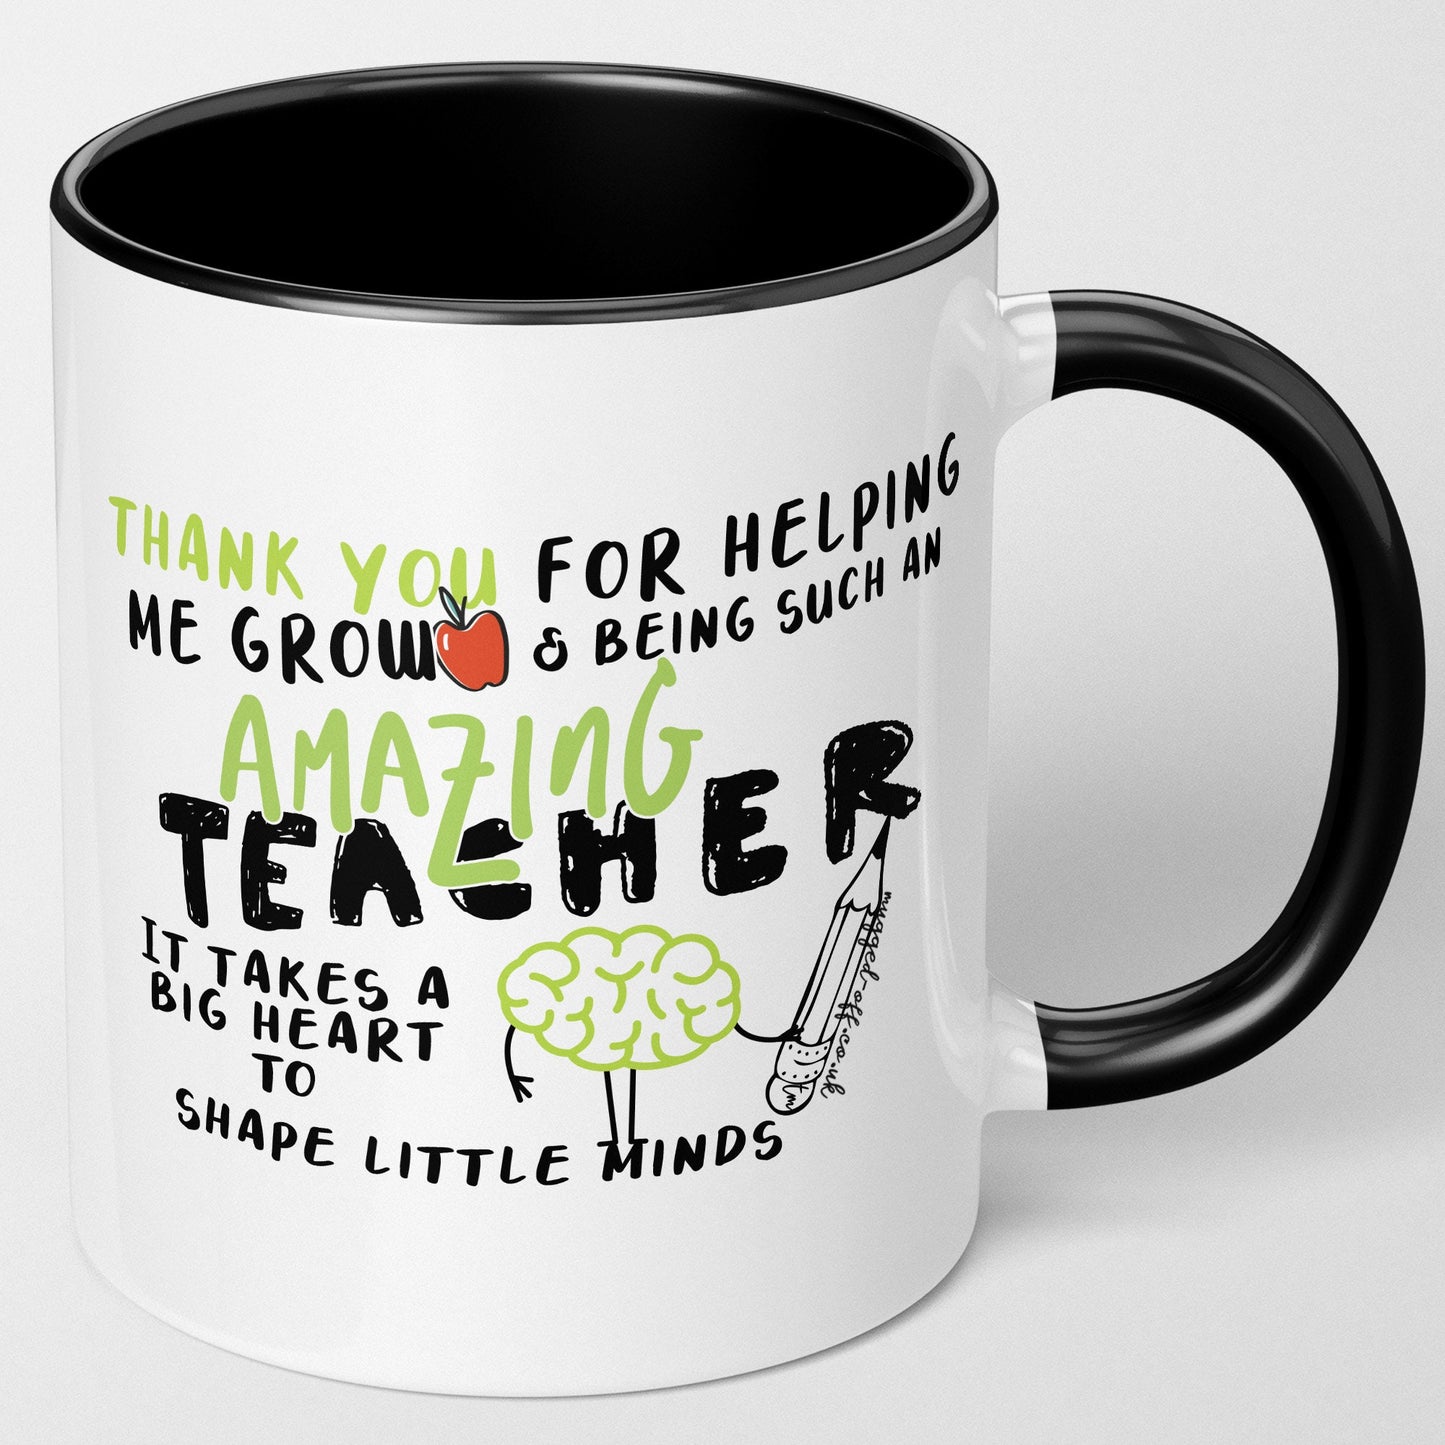 Teacher Gifts End of Term Gift Teaching assistant Mug Gift Teacher Gift Gift for teacher End of School Year assistant